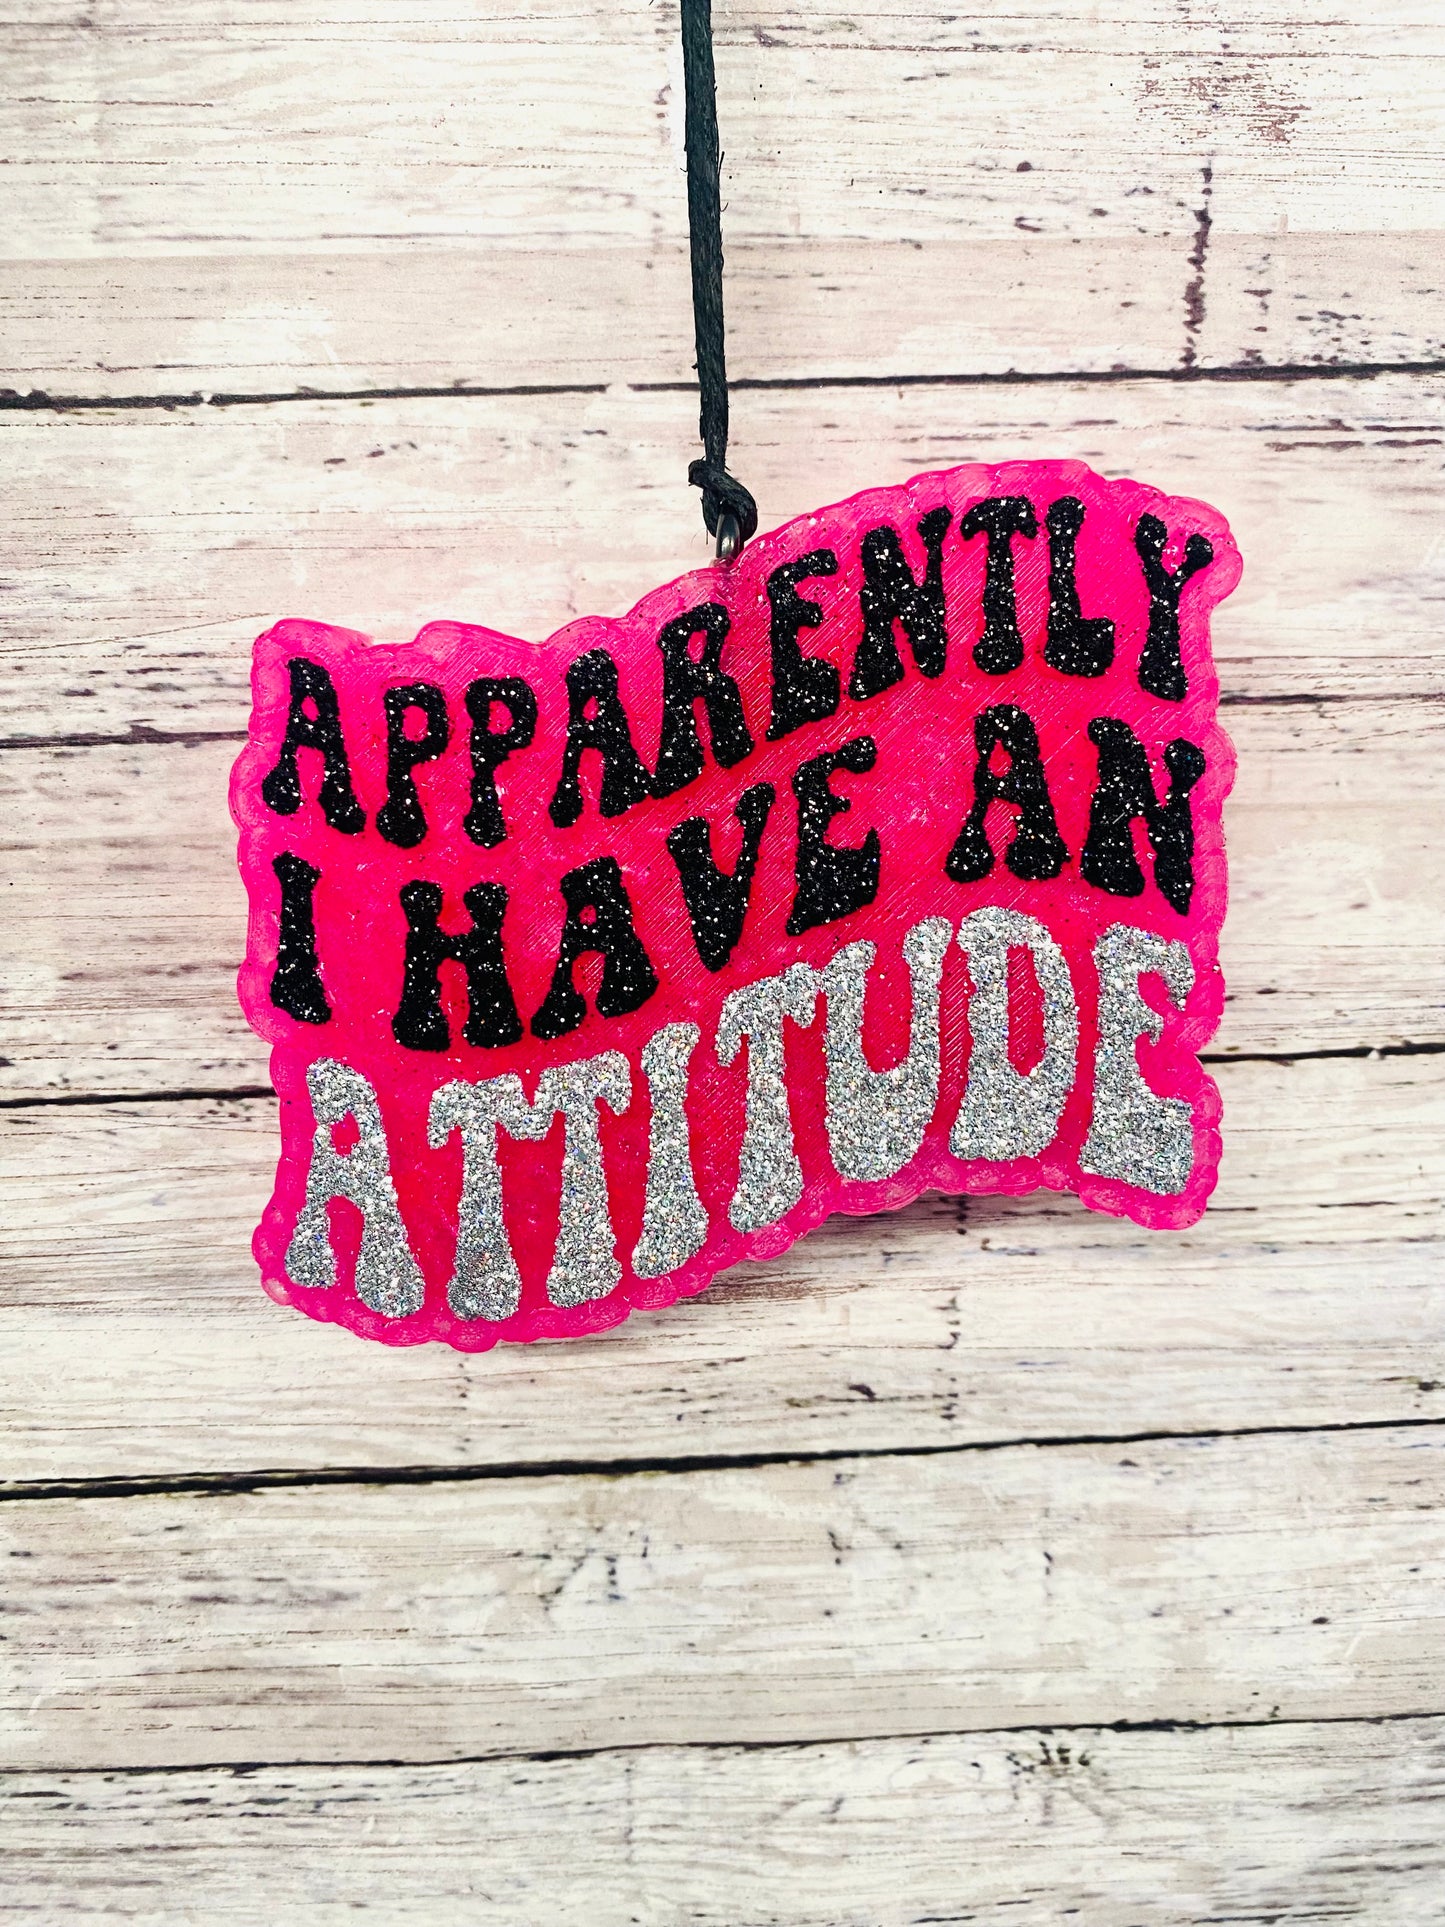 Apparently I have an Attitude